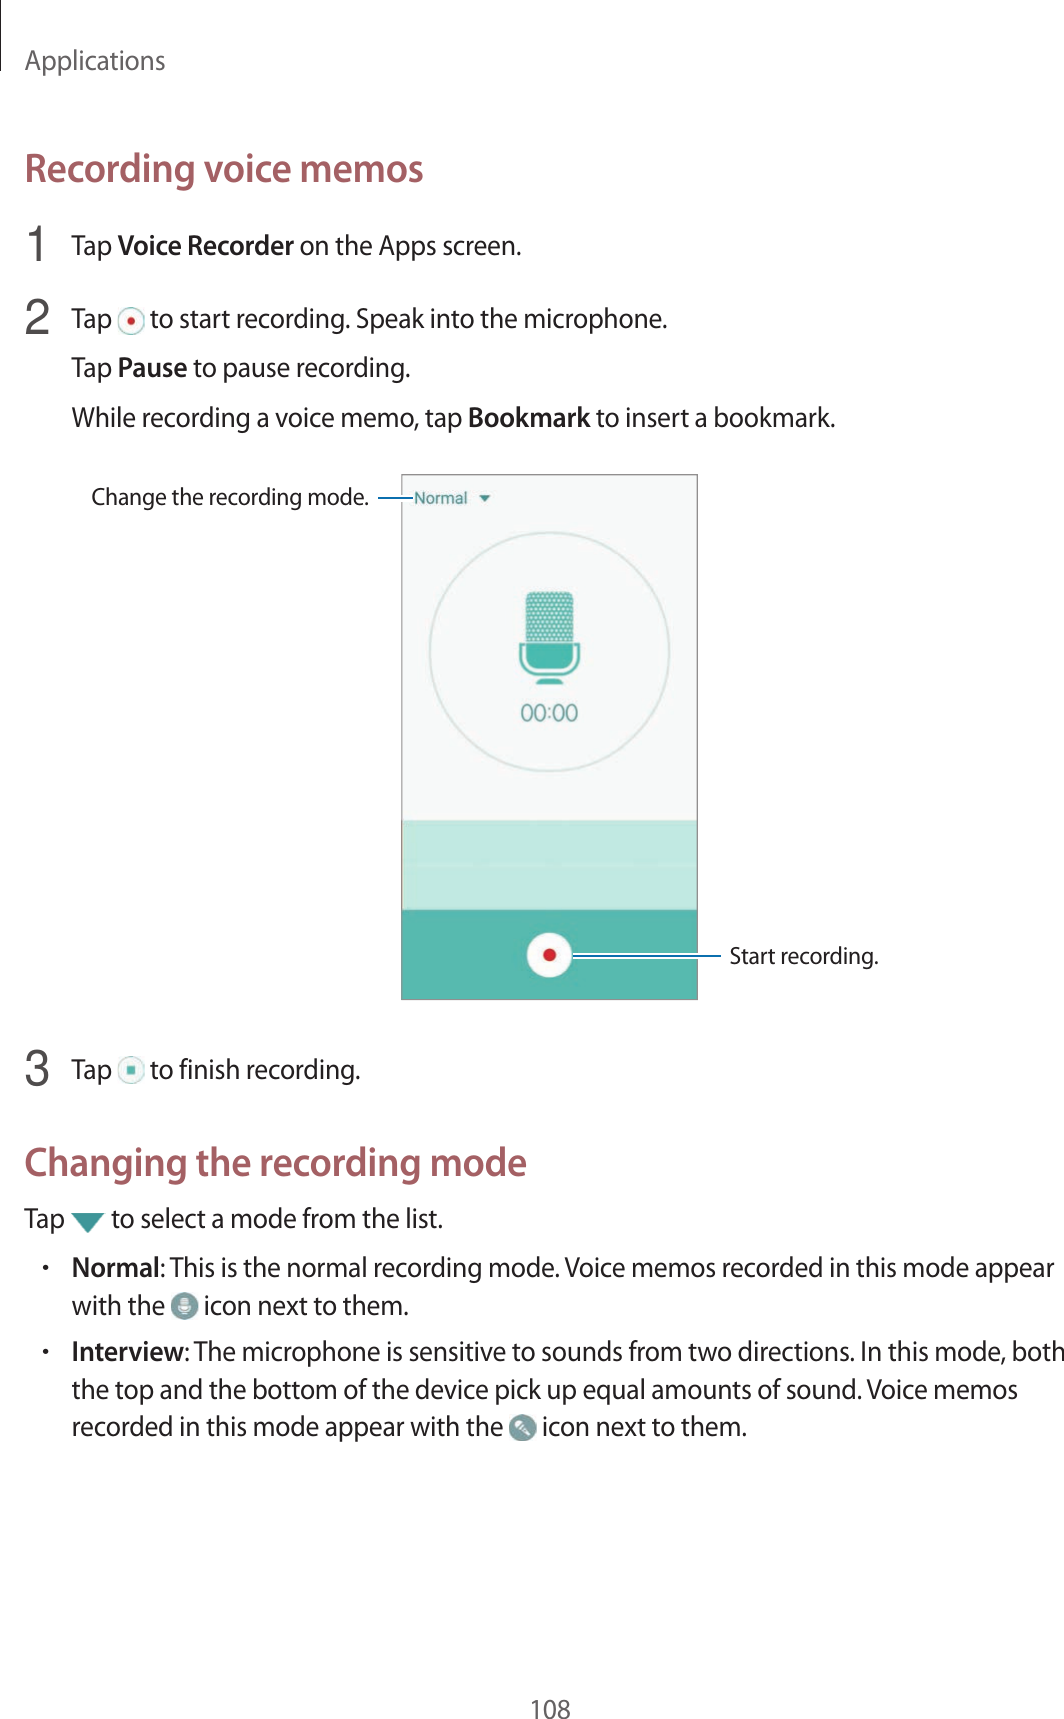 Applications108Recor ding v oic e memos1  Tap Voice Recor der on the Apps screen.2  Tap   to start recor ding . Speak in to the micr ophone .Tap Pause to pause rec or ding .While rec or ding a v oice memo, tap Bookmark to insert a bookmark.Change the recor ding mode .Start rec or ding .3  Tap   to finish recor ding .Changing the r ec or ding modeTap   to select a mode from the list.•Normal: This is the normal rec or ding mode . Voice memos r ecor ded in this mode appear with the   icon next to them.•Interview: The micr ophone is sensitiv e to sounds fr om two dir ections. In this mode, both the top and the bottom of the devic e pick up equal amounts of sound . Voice memos recor ded in this mode appear with the   icon next to them.